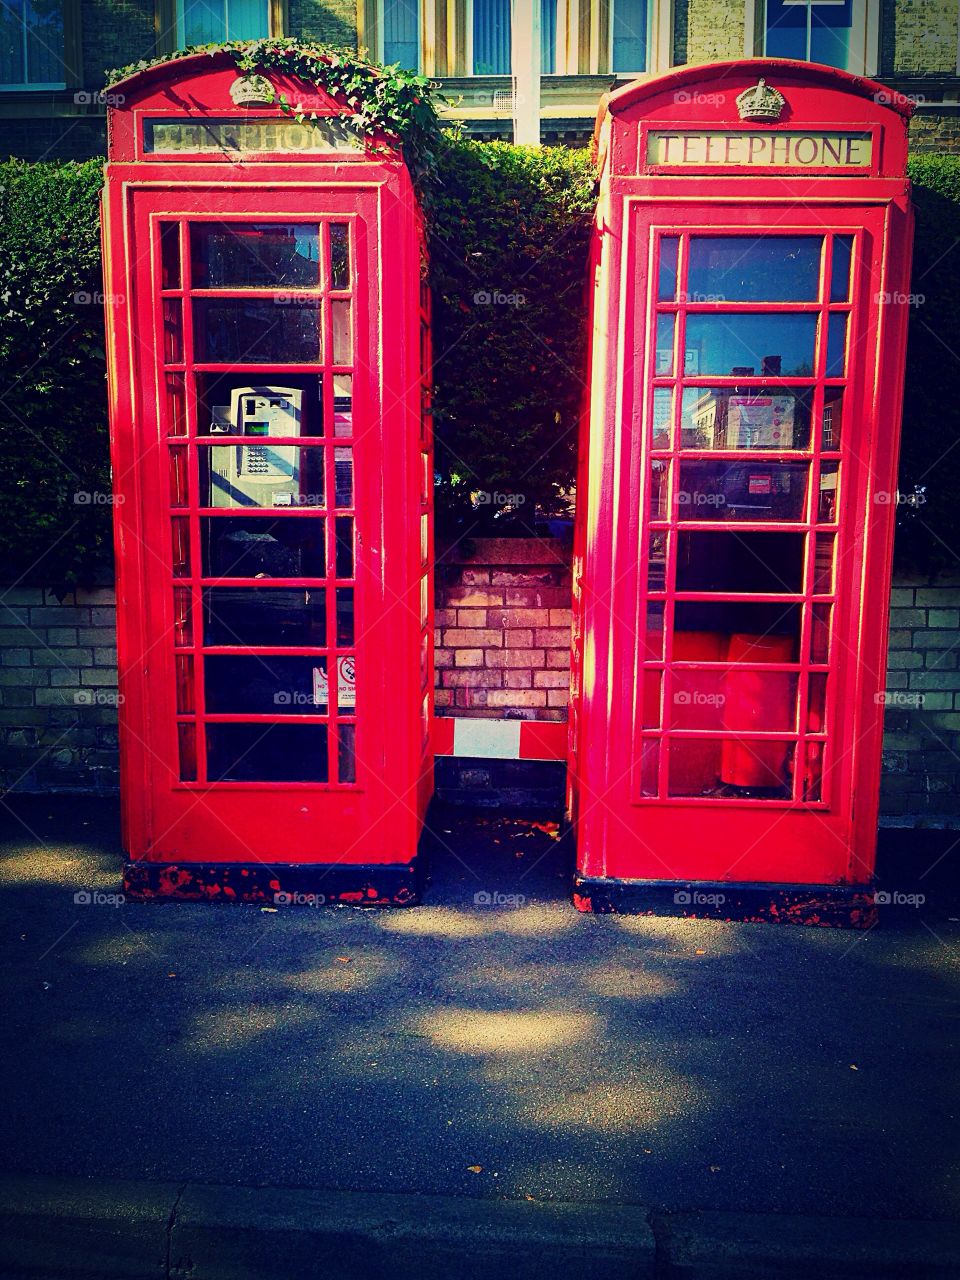 A pair of London telephone booths 